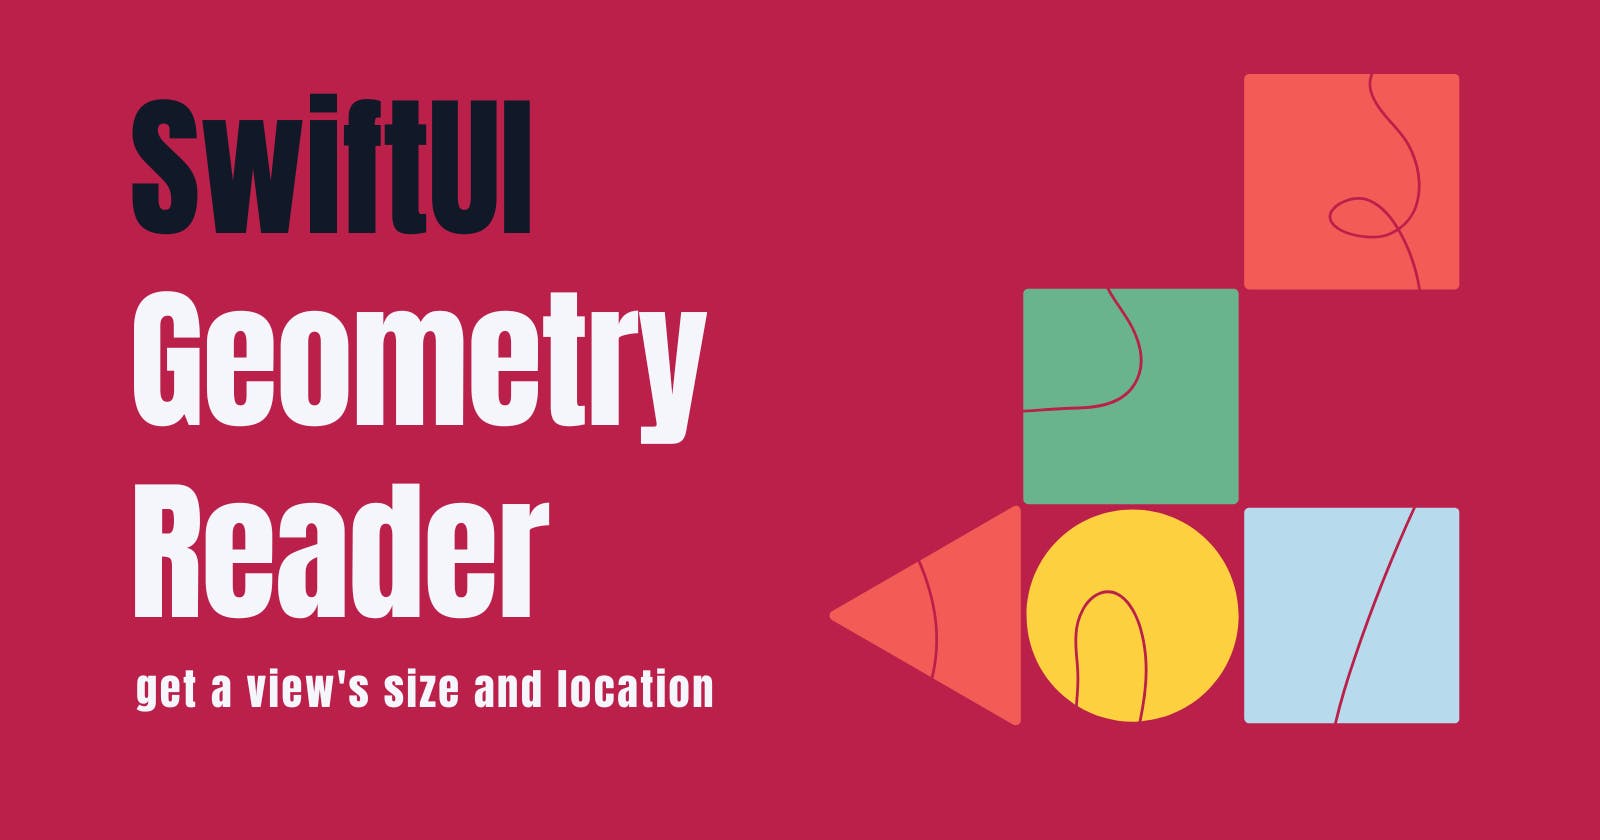 Geometry Reader in SwiftUI: get a view's size and location